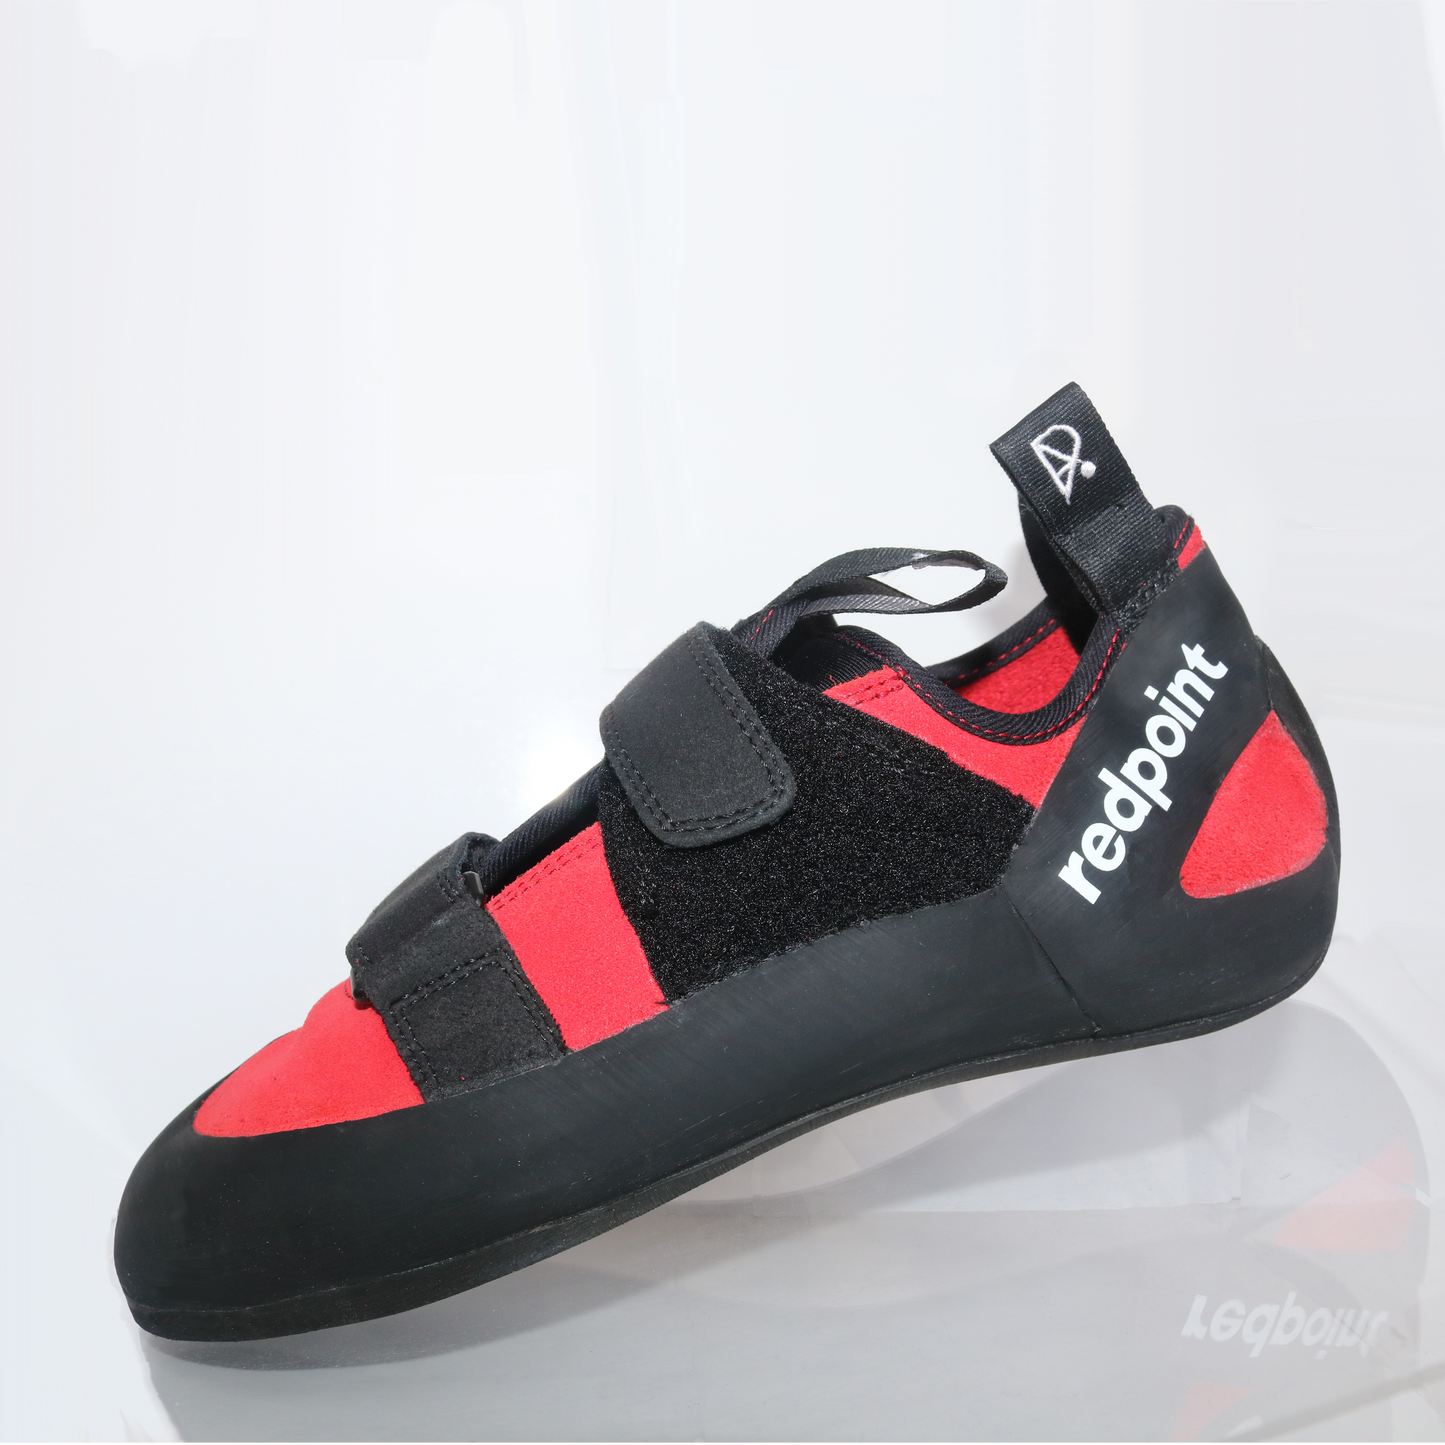 Redpoint Climbing Shoes Redpoint Ascend Bouldering Shoes left angled